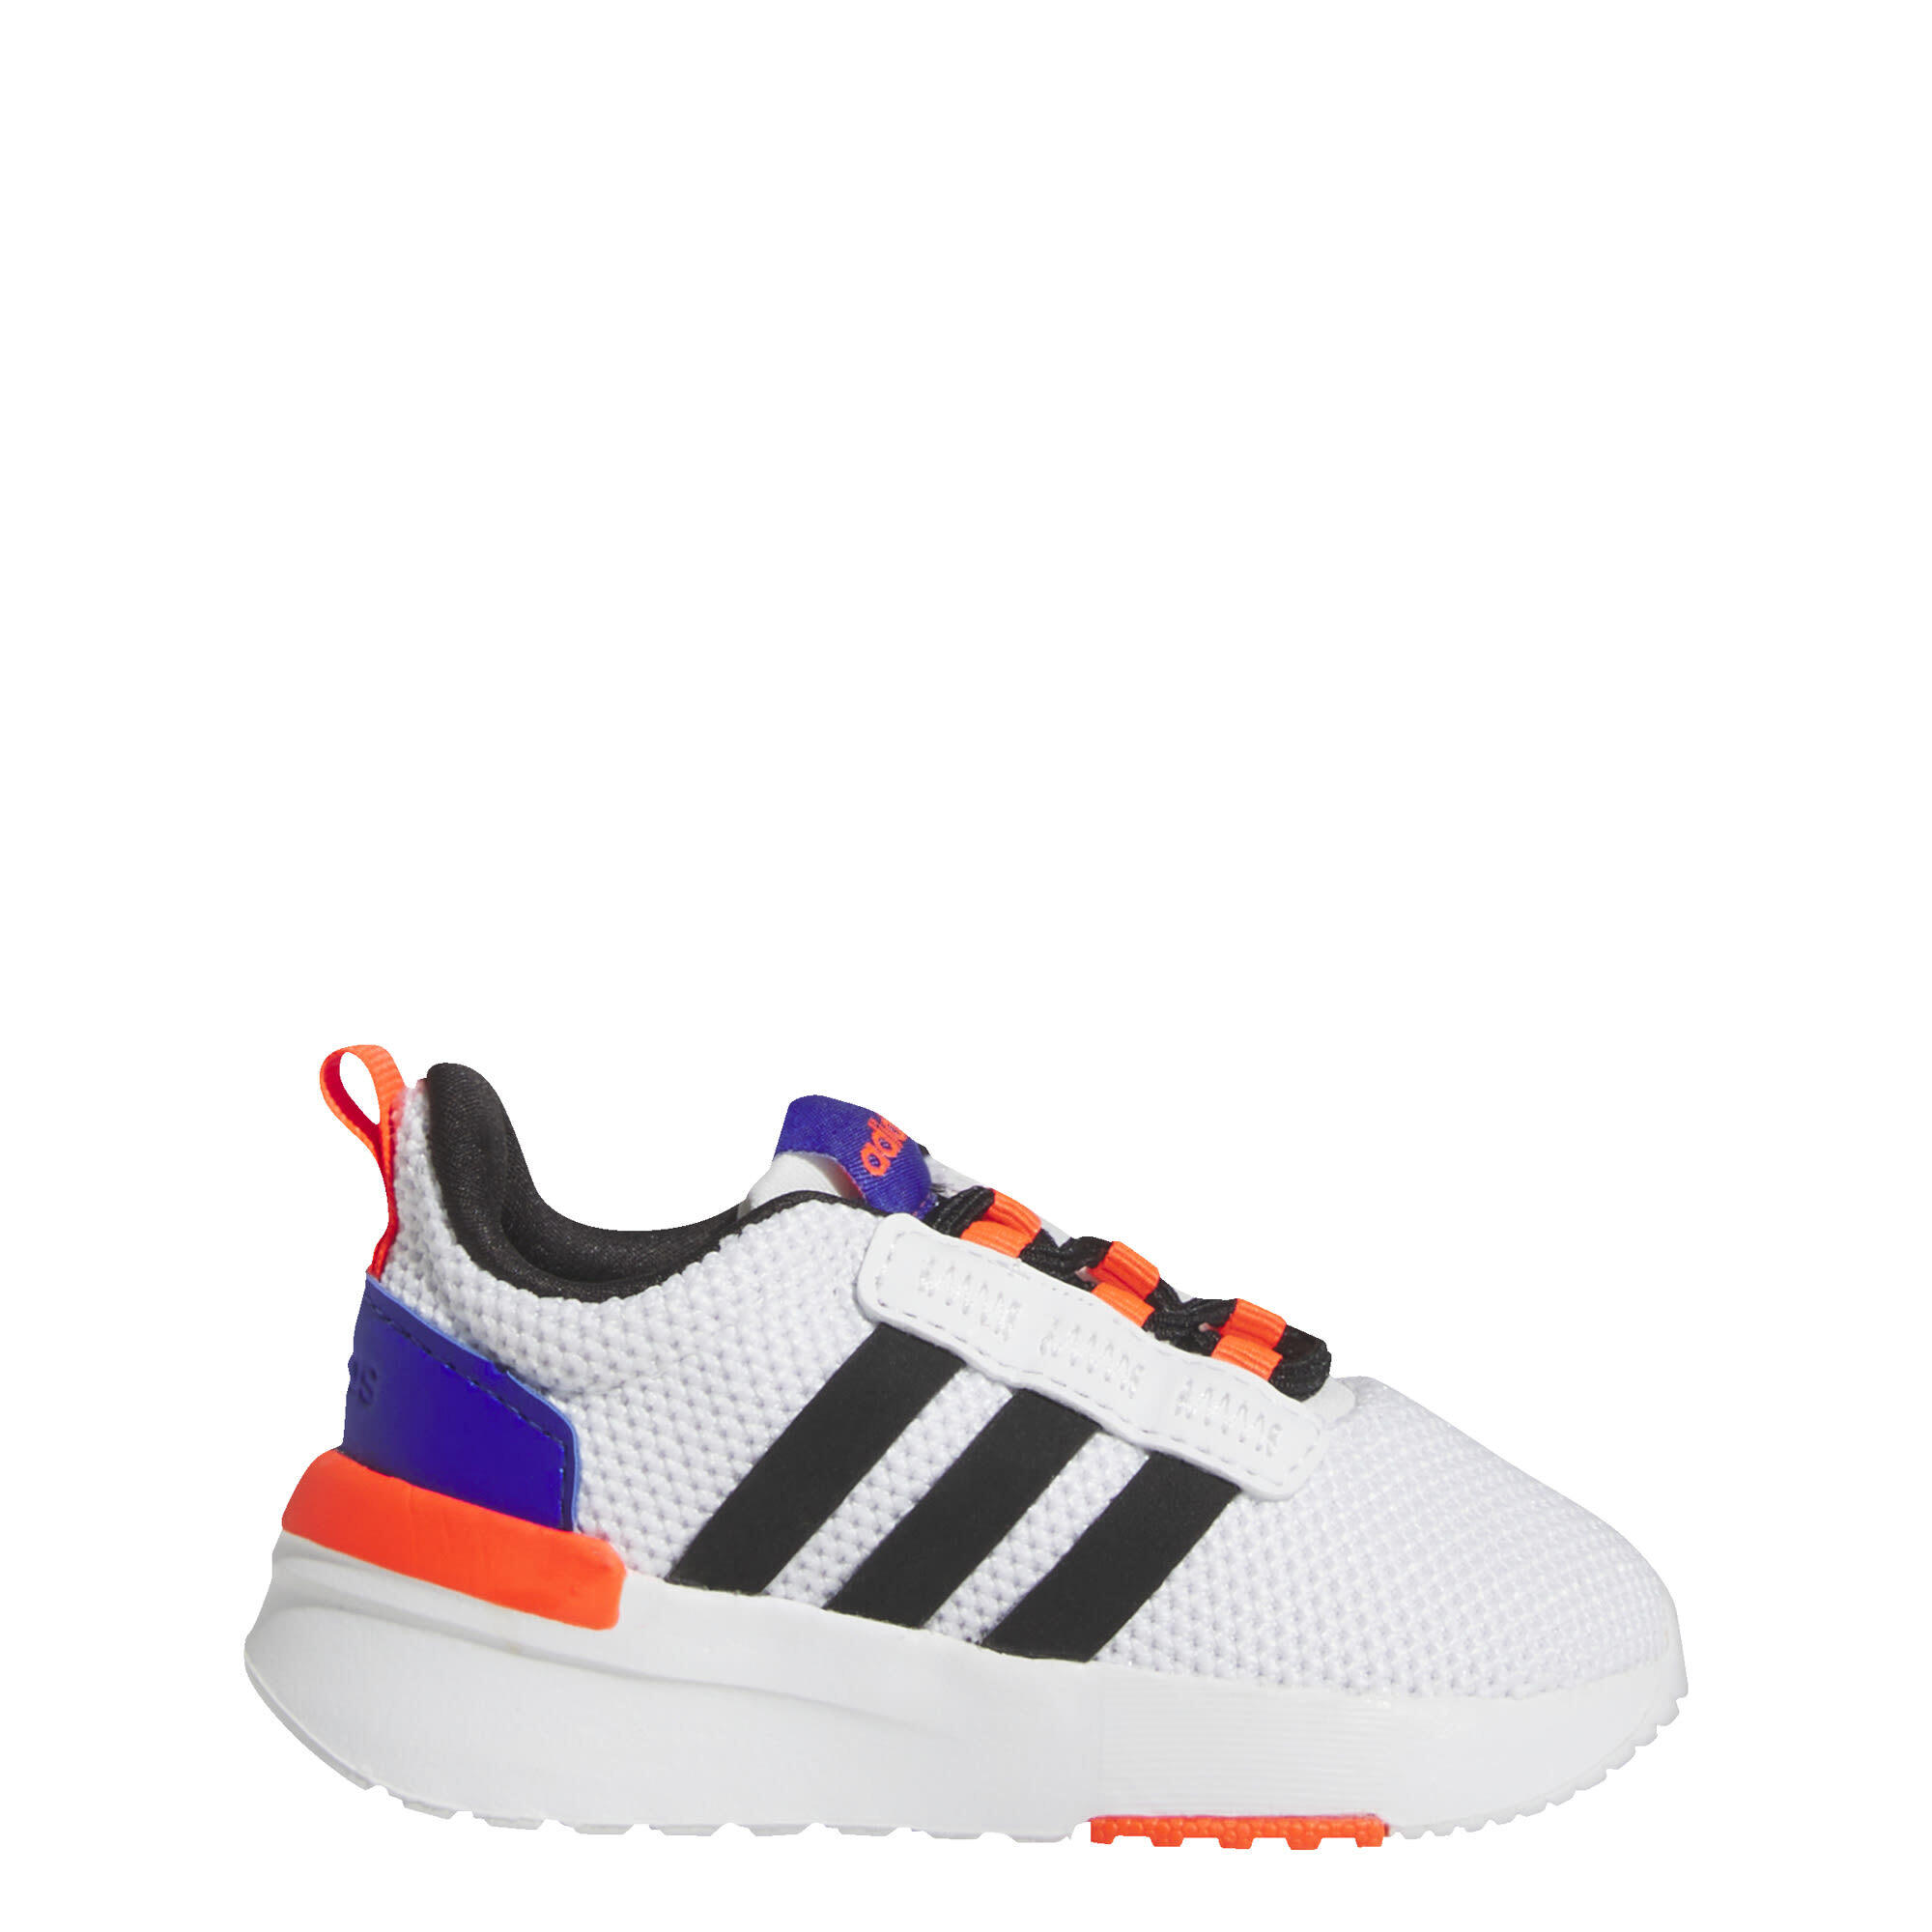 ADIDAS Racer TR21 Shoes